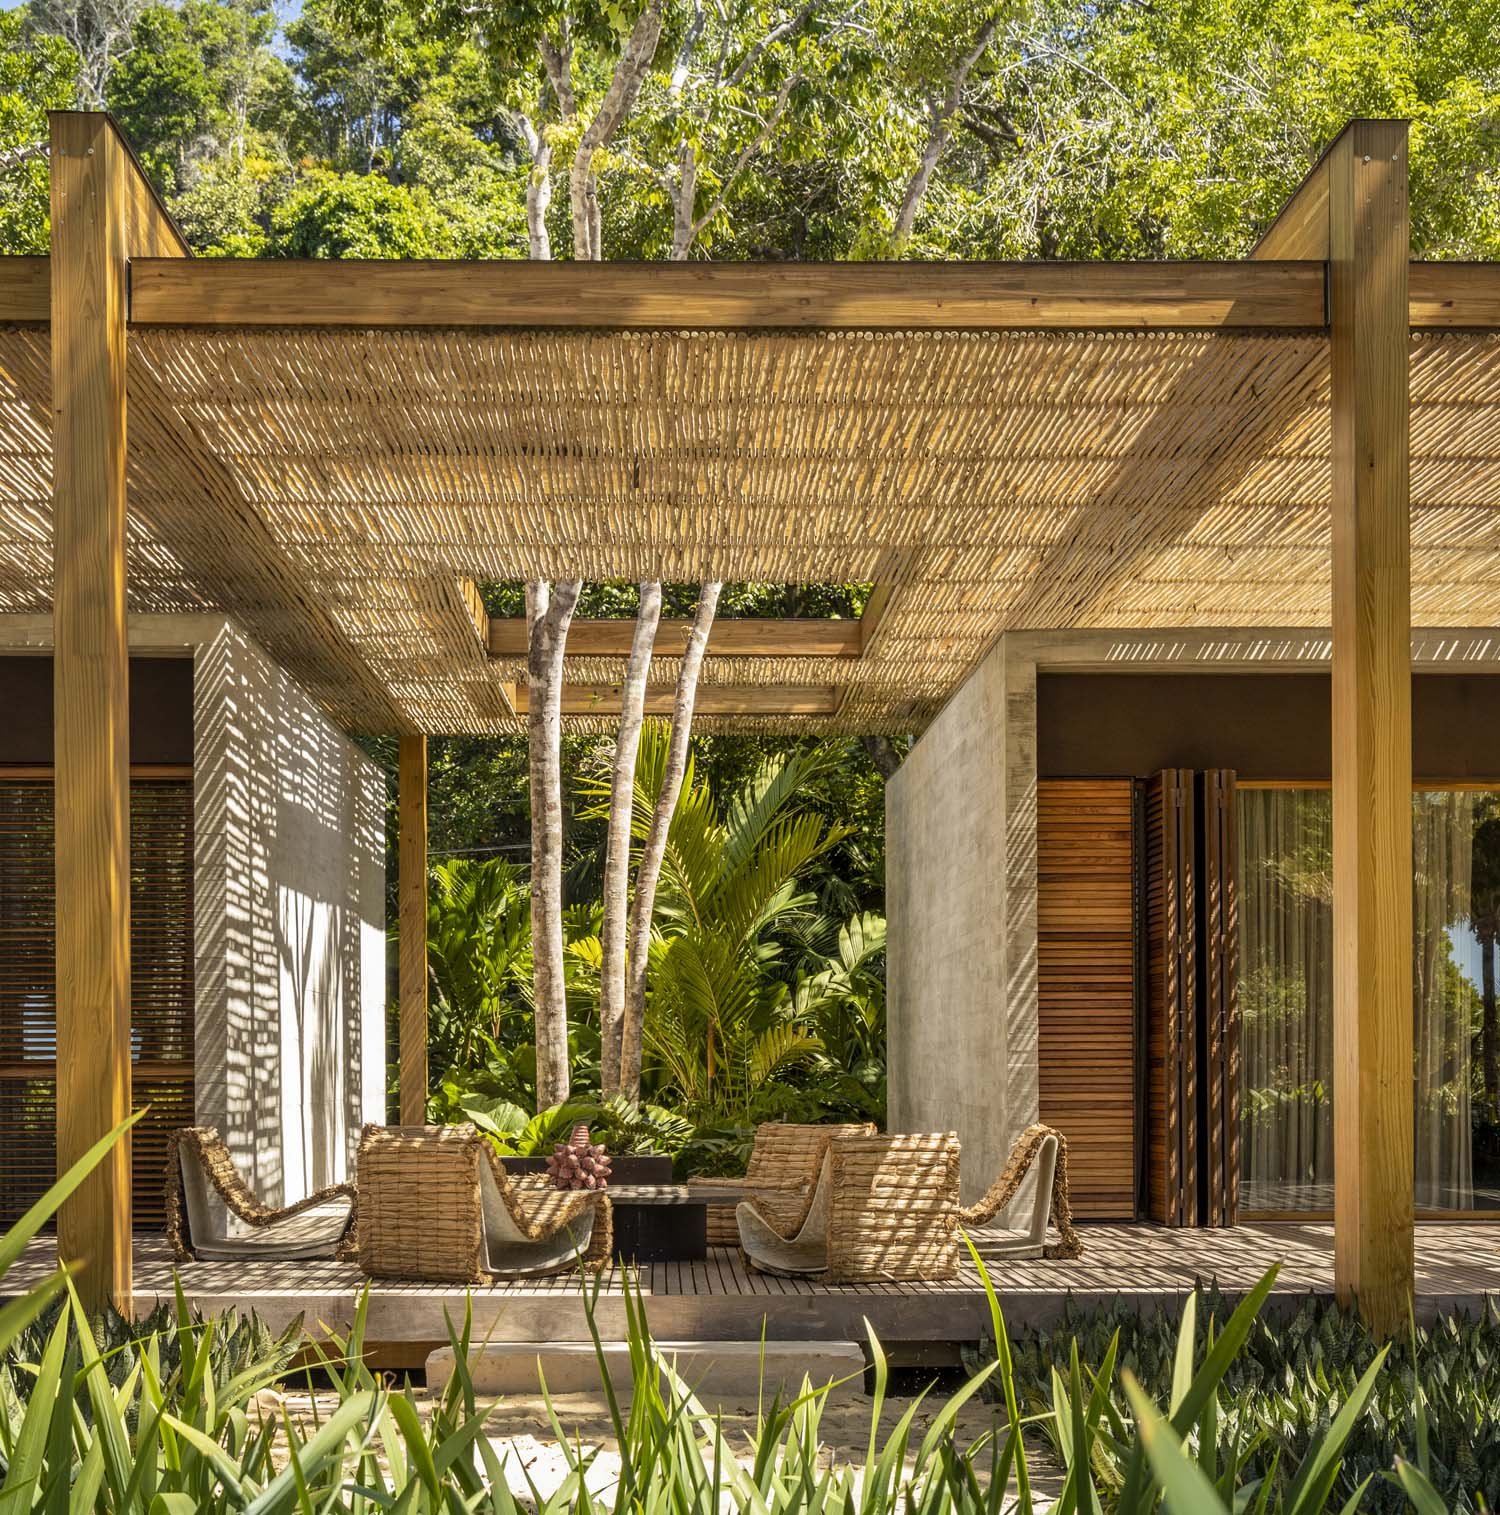 The continuity of the twelve rectangular openings in the canopy is interrupted by several trees that are embraced by the deck. | Fernando Guerra